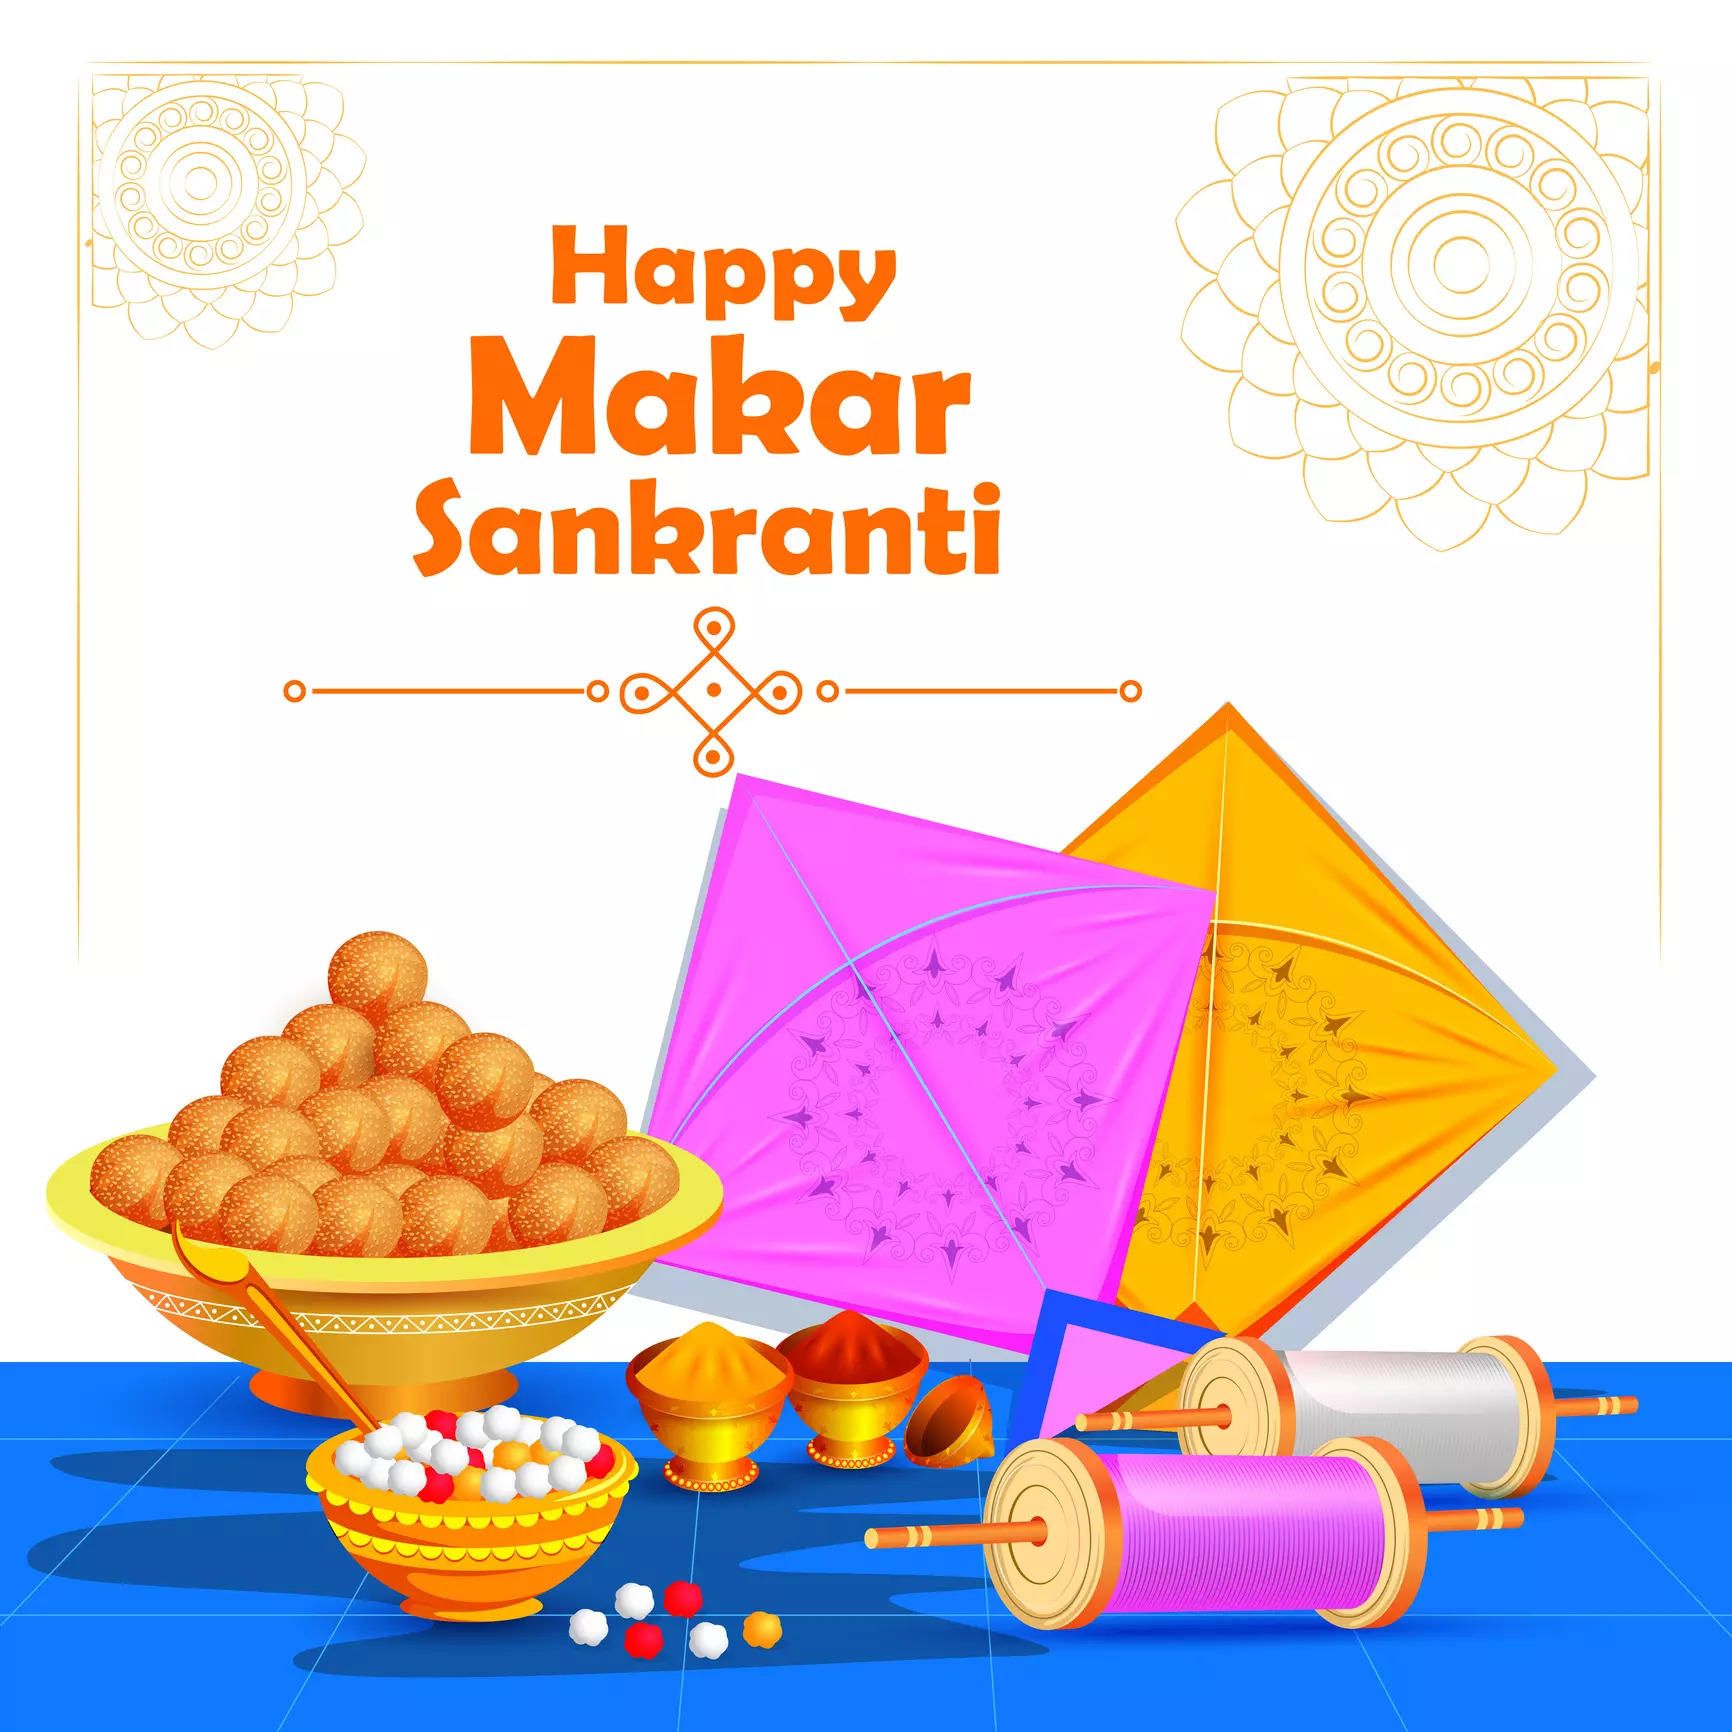 Happy Makar Sankranti 2022: Wishes, Messages, Quotes, Images, Facebook &  Whatsapp status - Times of India